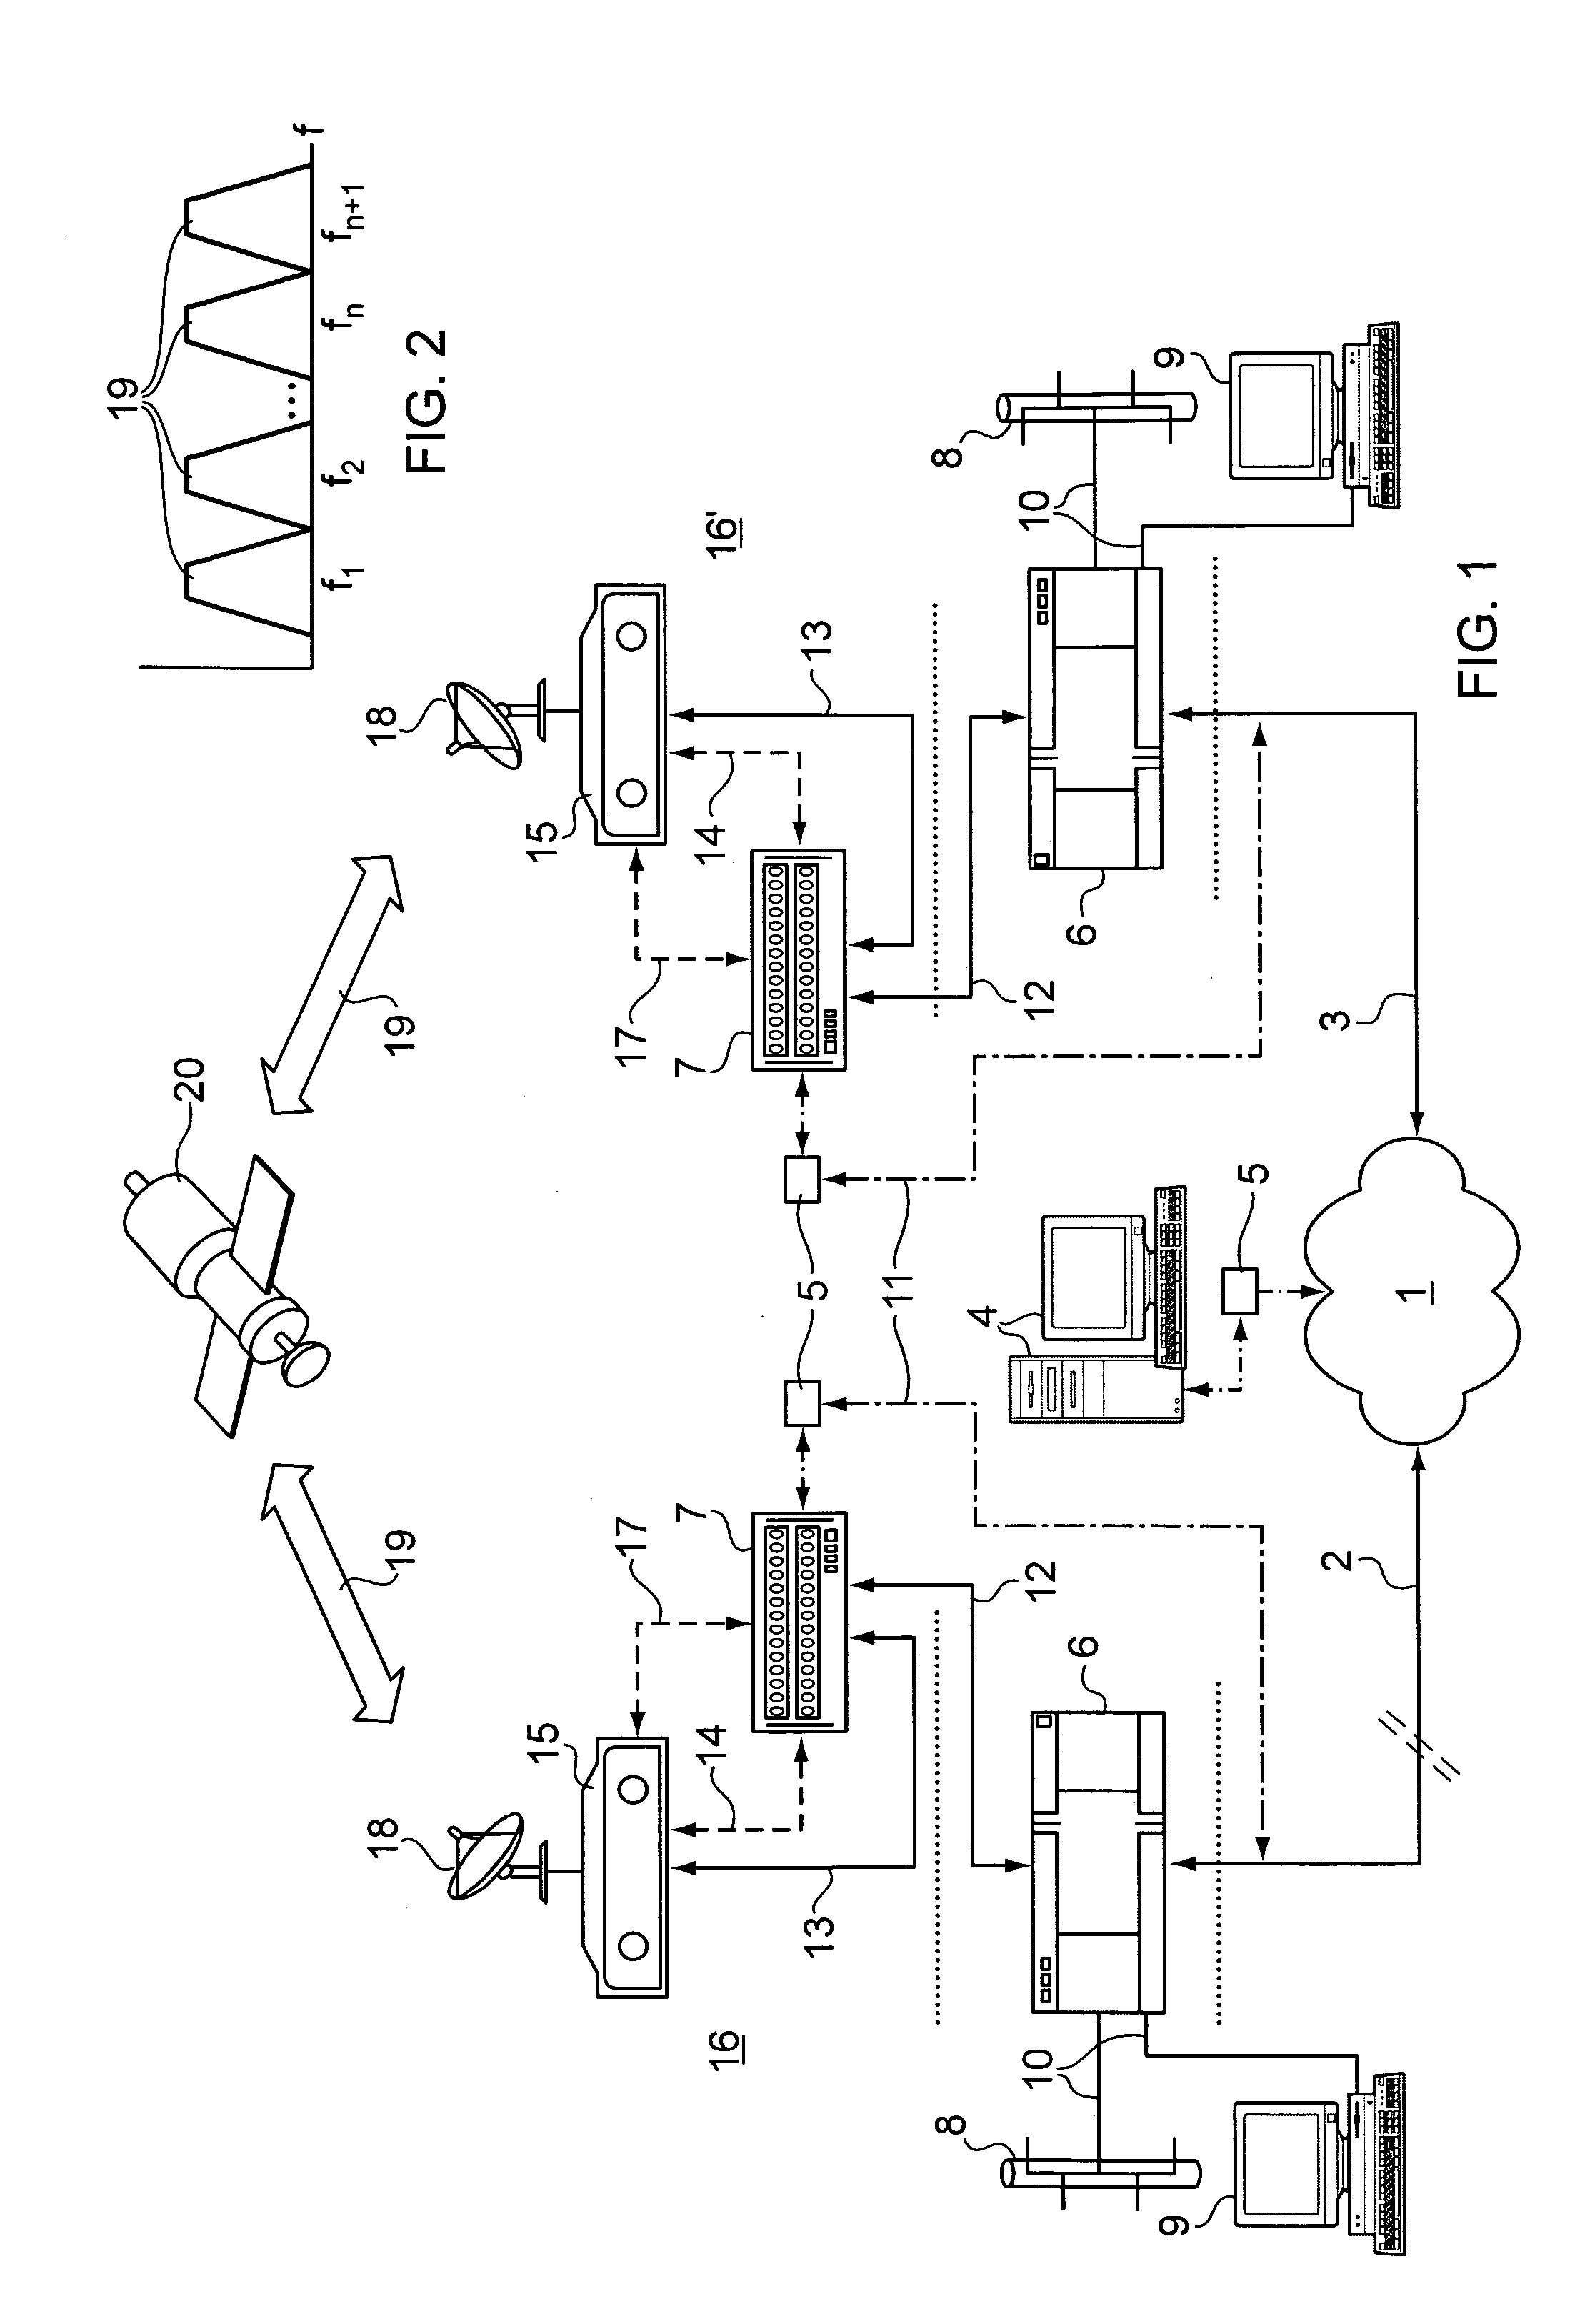 Method and system for controlling the use of satellite transmission capacity in terrestrial networks